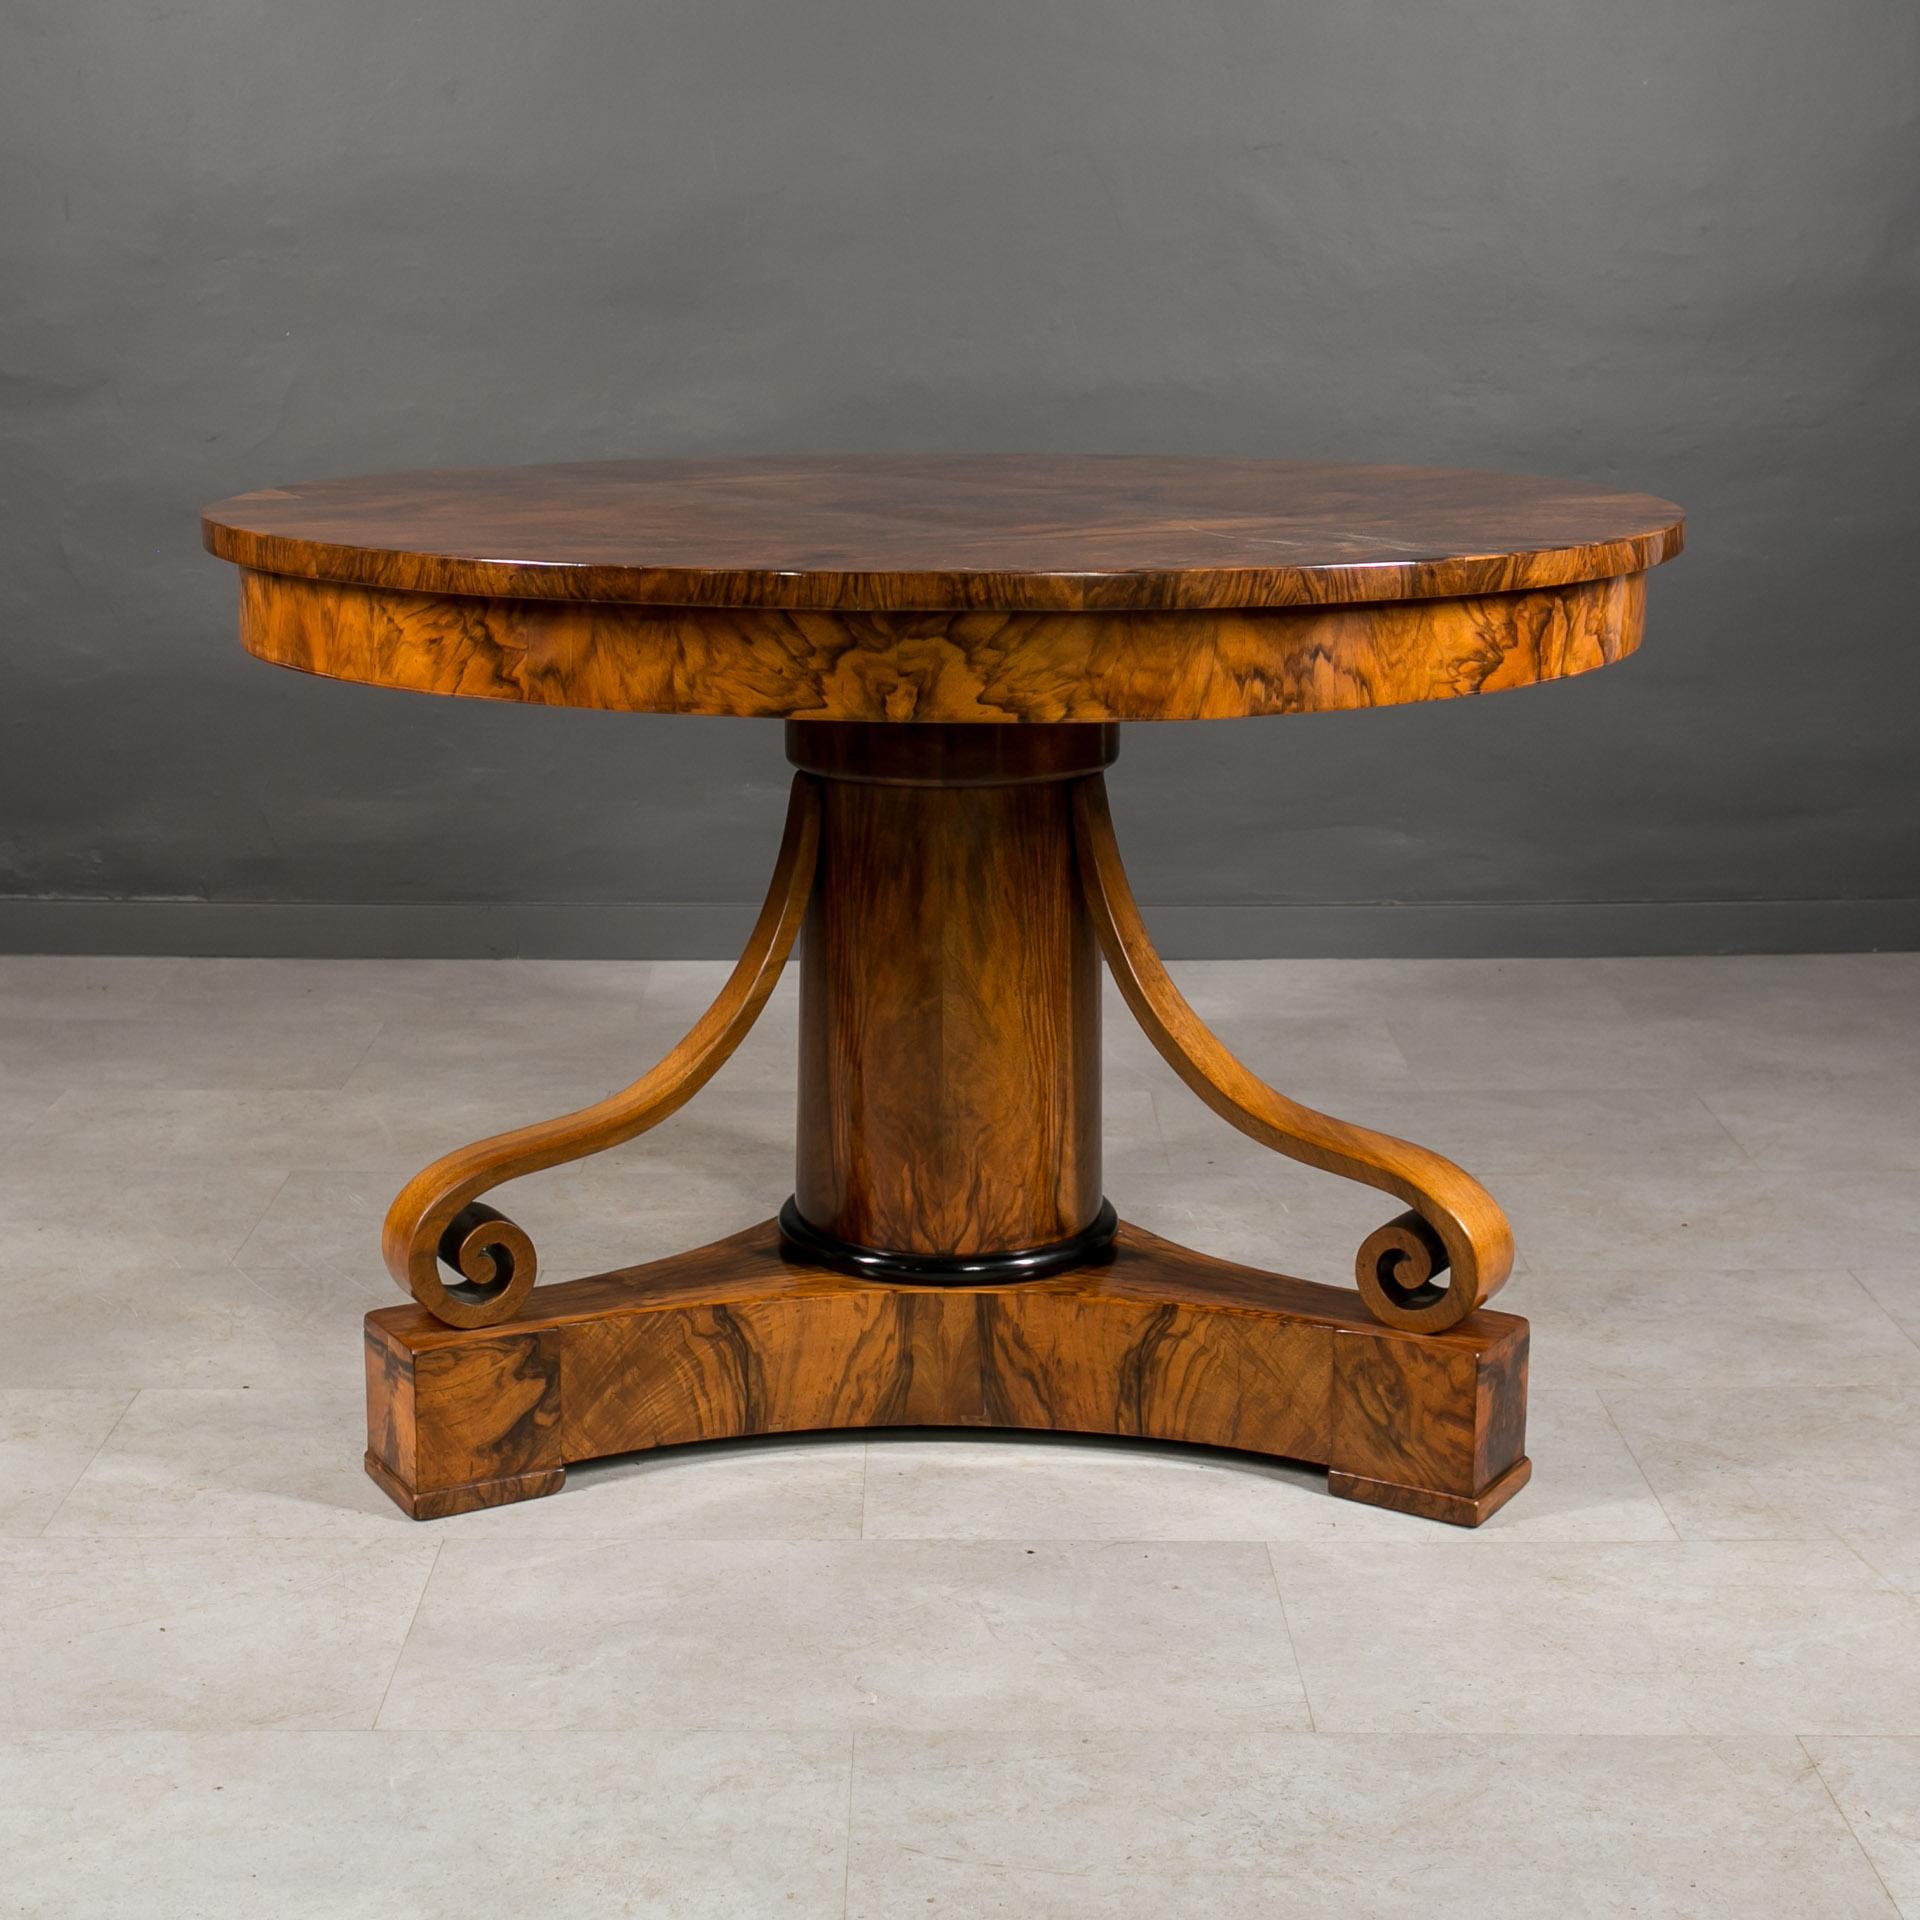 Biedermeier Round Table in Exceptional Walnut Veneer, Germany, 19th Century In Good Condition For Sale In Wrocław, Poland